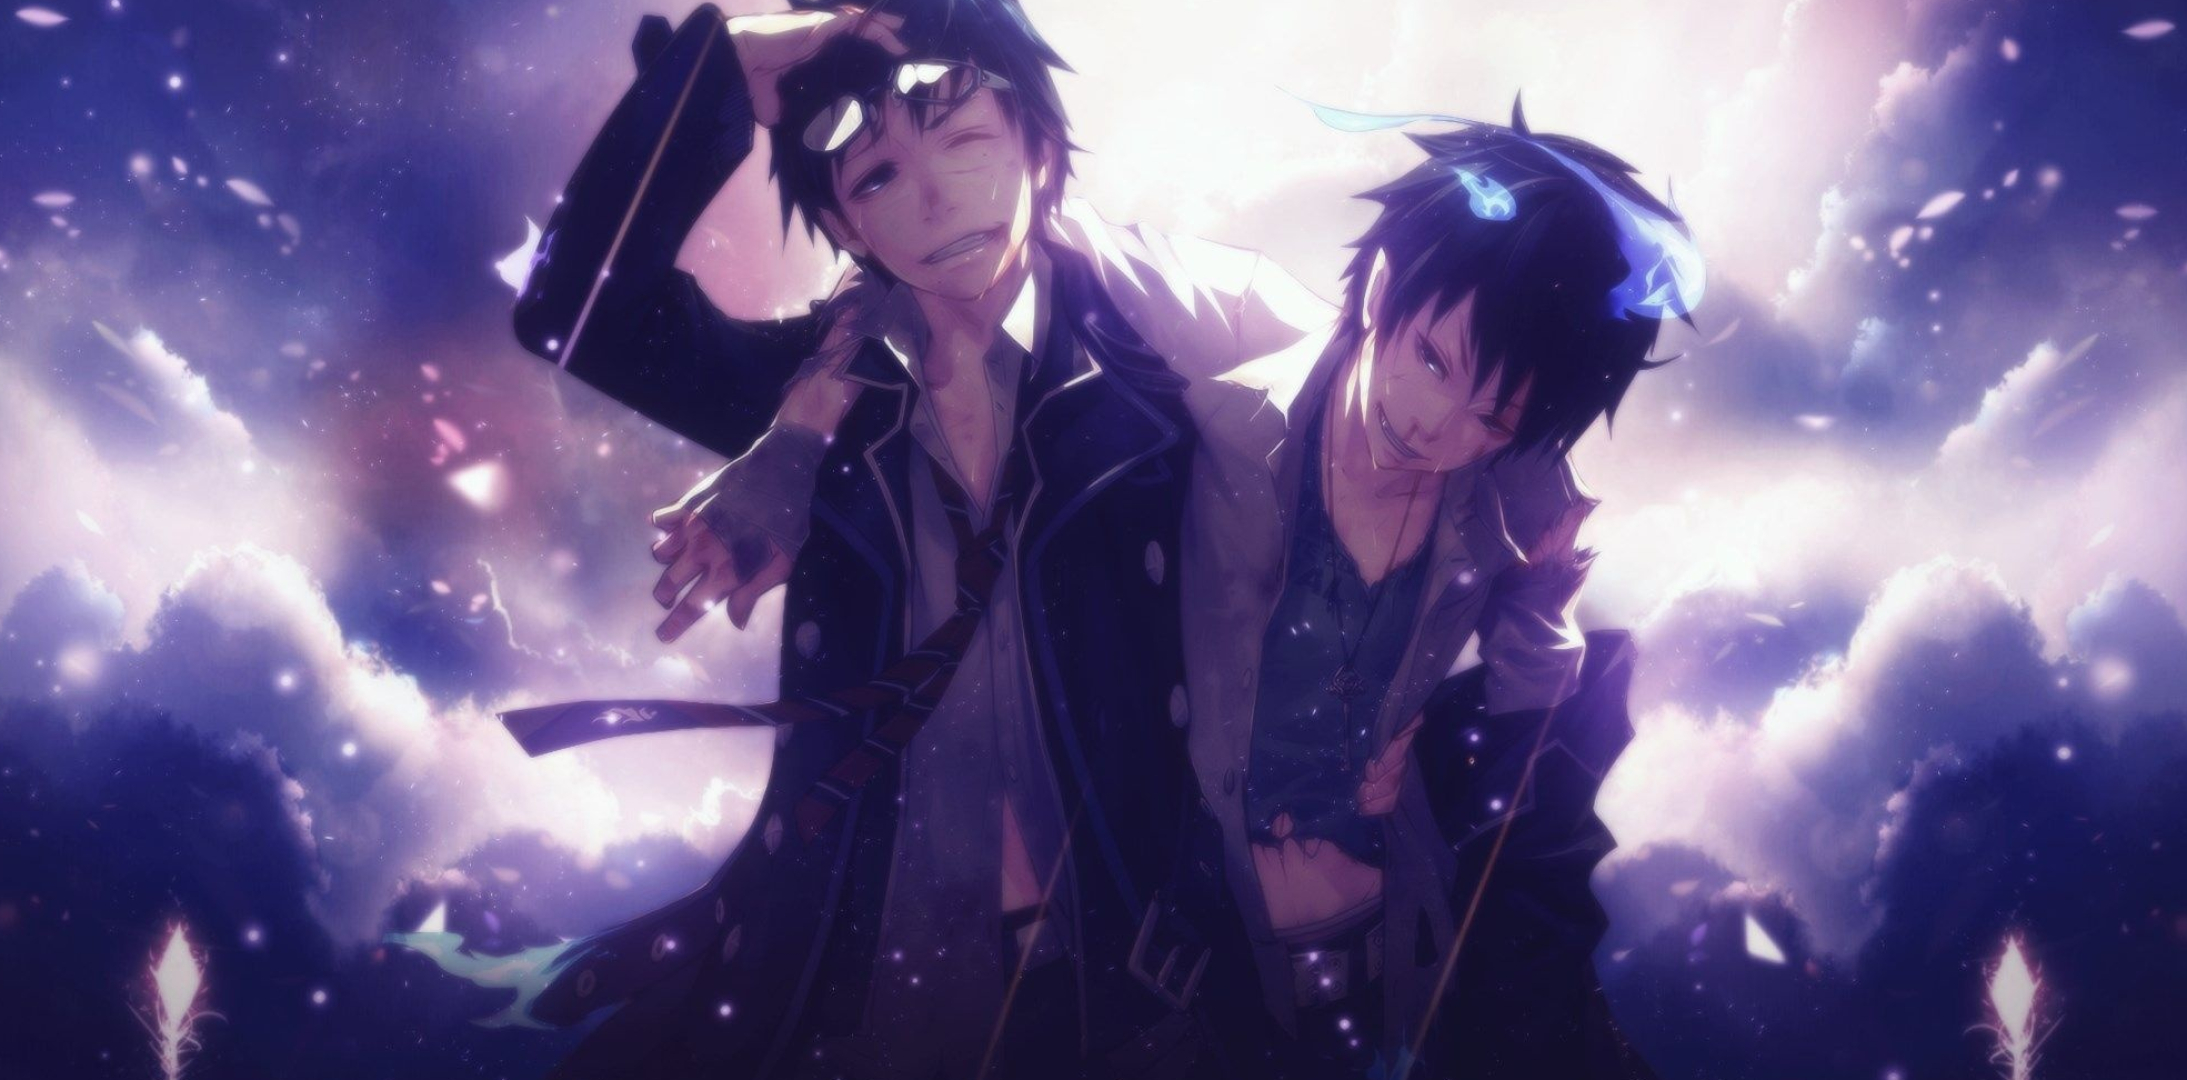 Blue Exorcist: Anime characters, A manga written and illustrated by Kazue Kato. 2190x1080 Dual Screen Wallpaper.